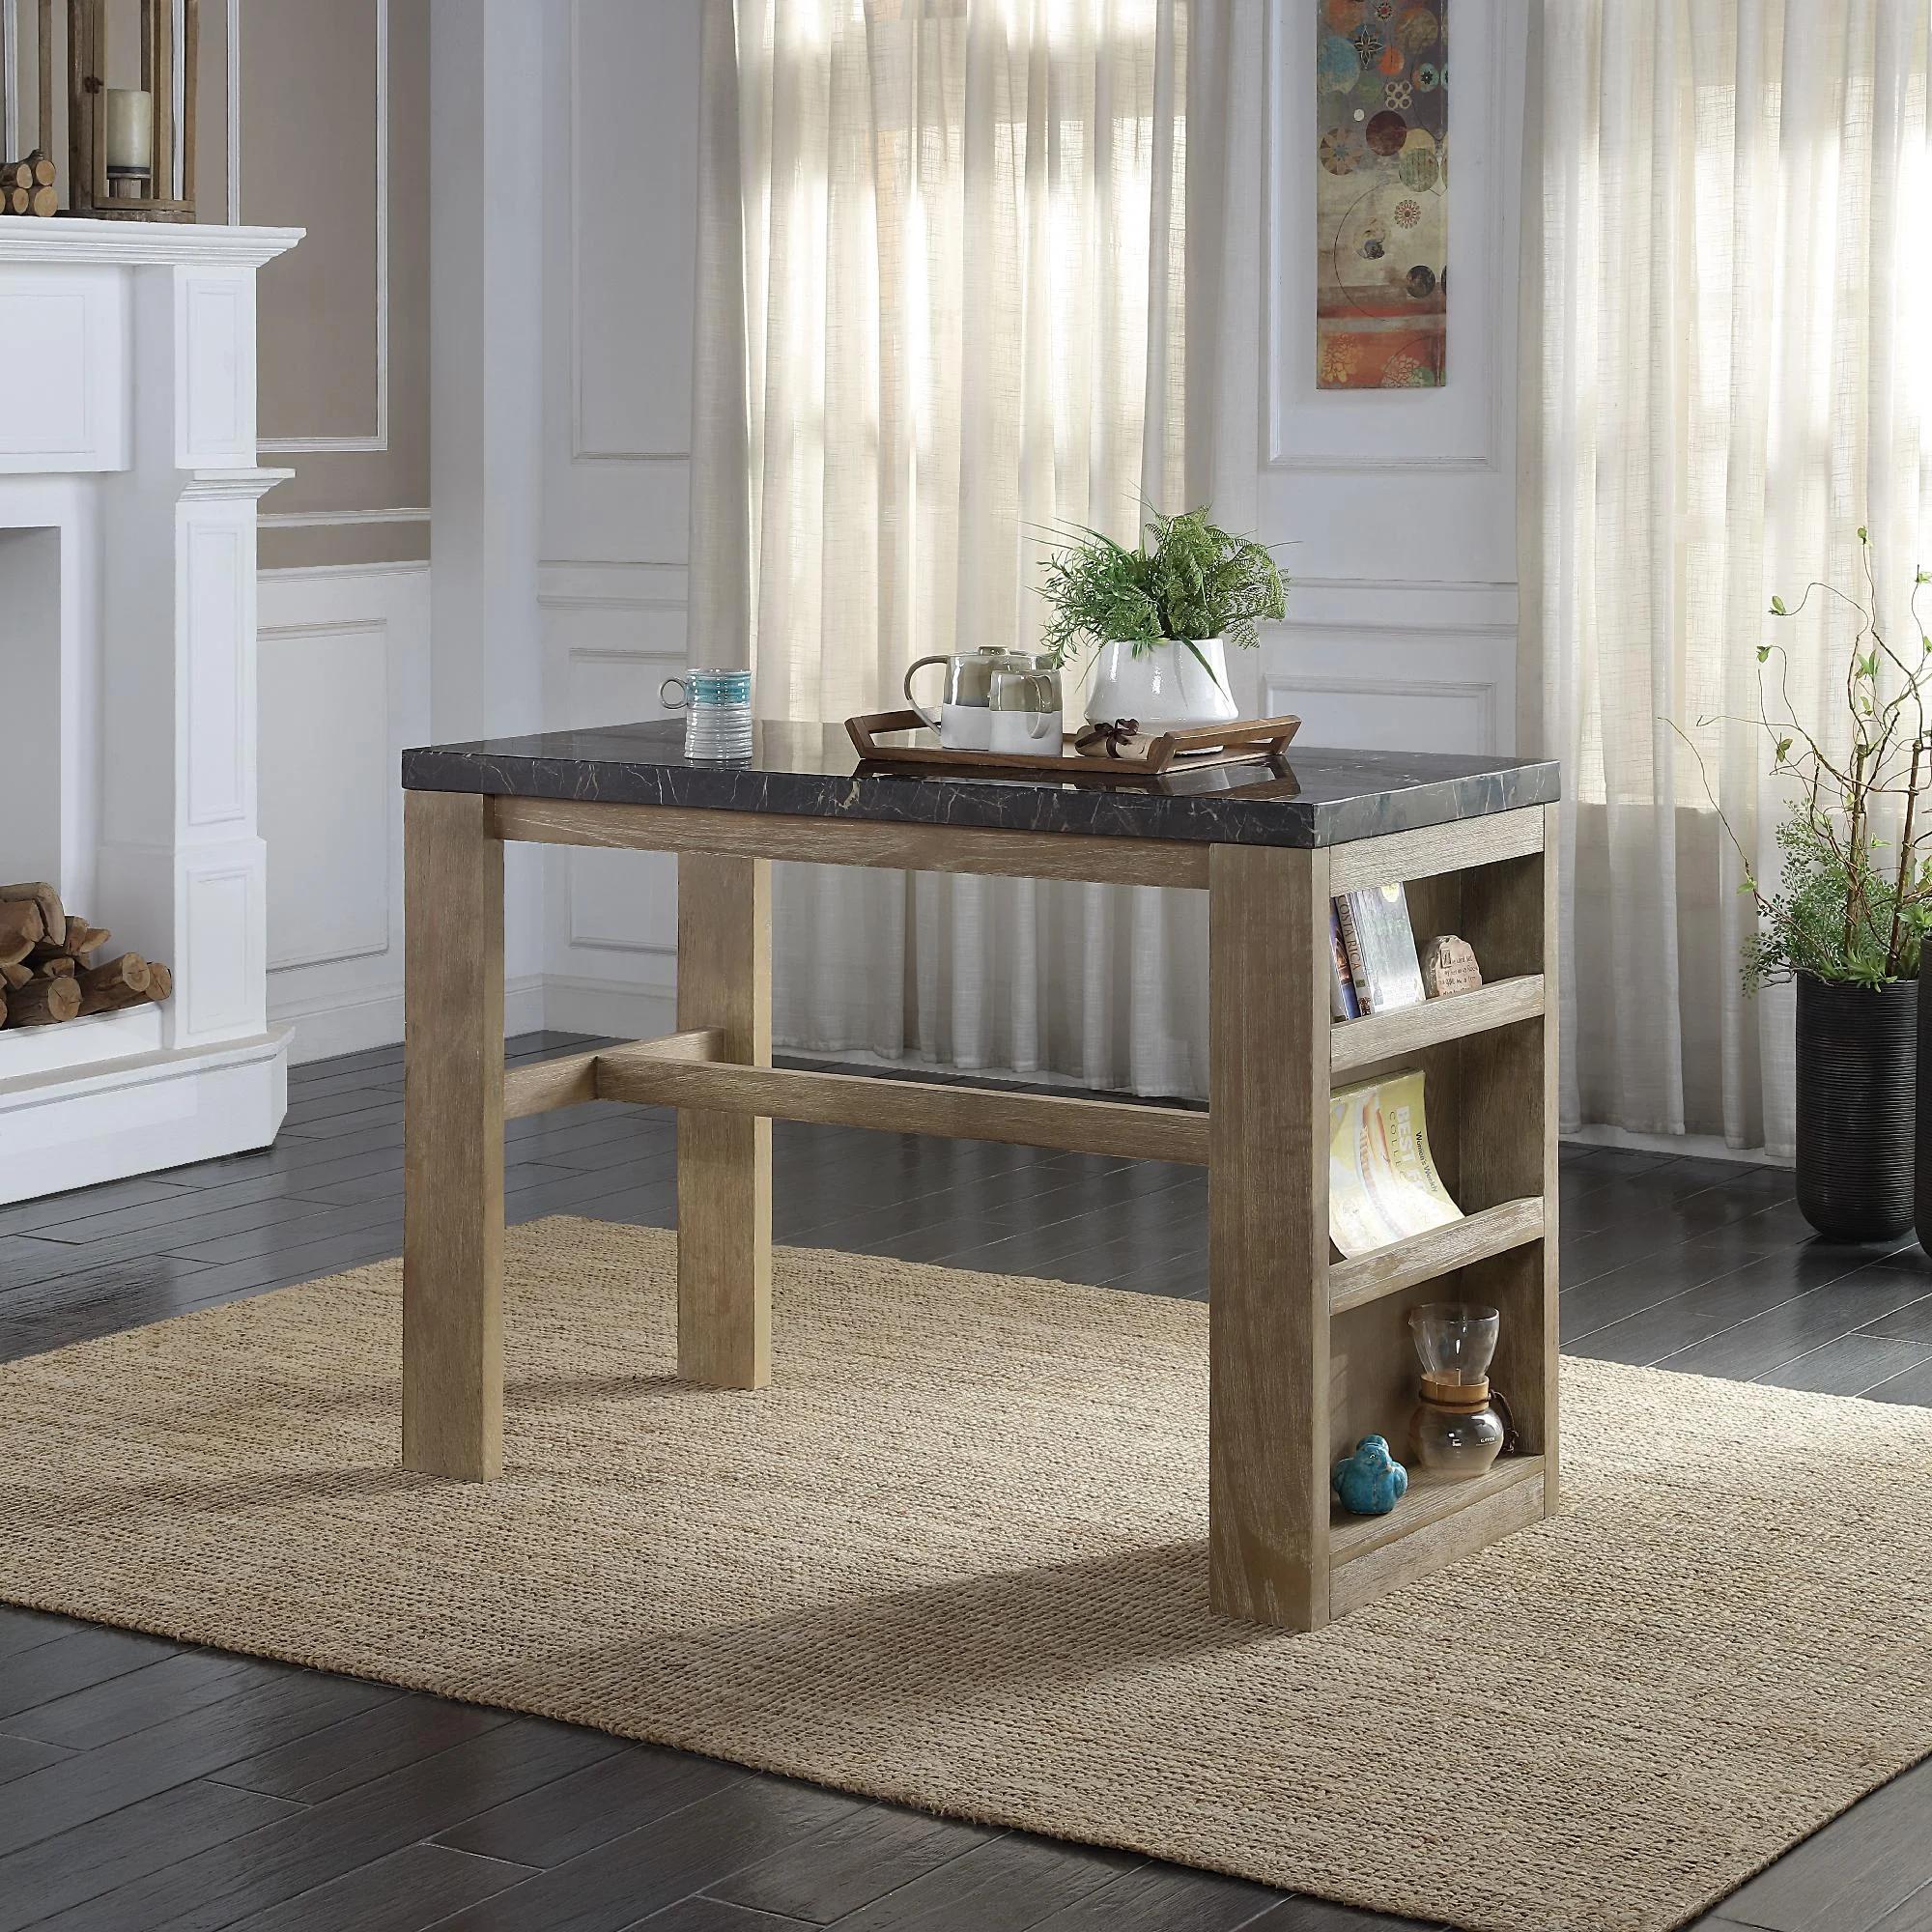 Transitional Counter Height Table Charnell DN00551 in Oak 